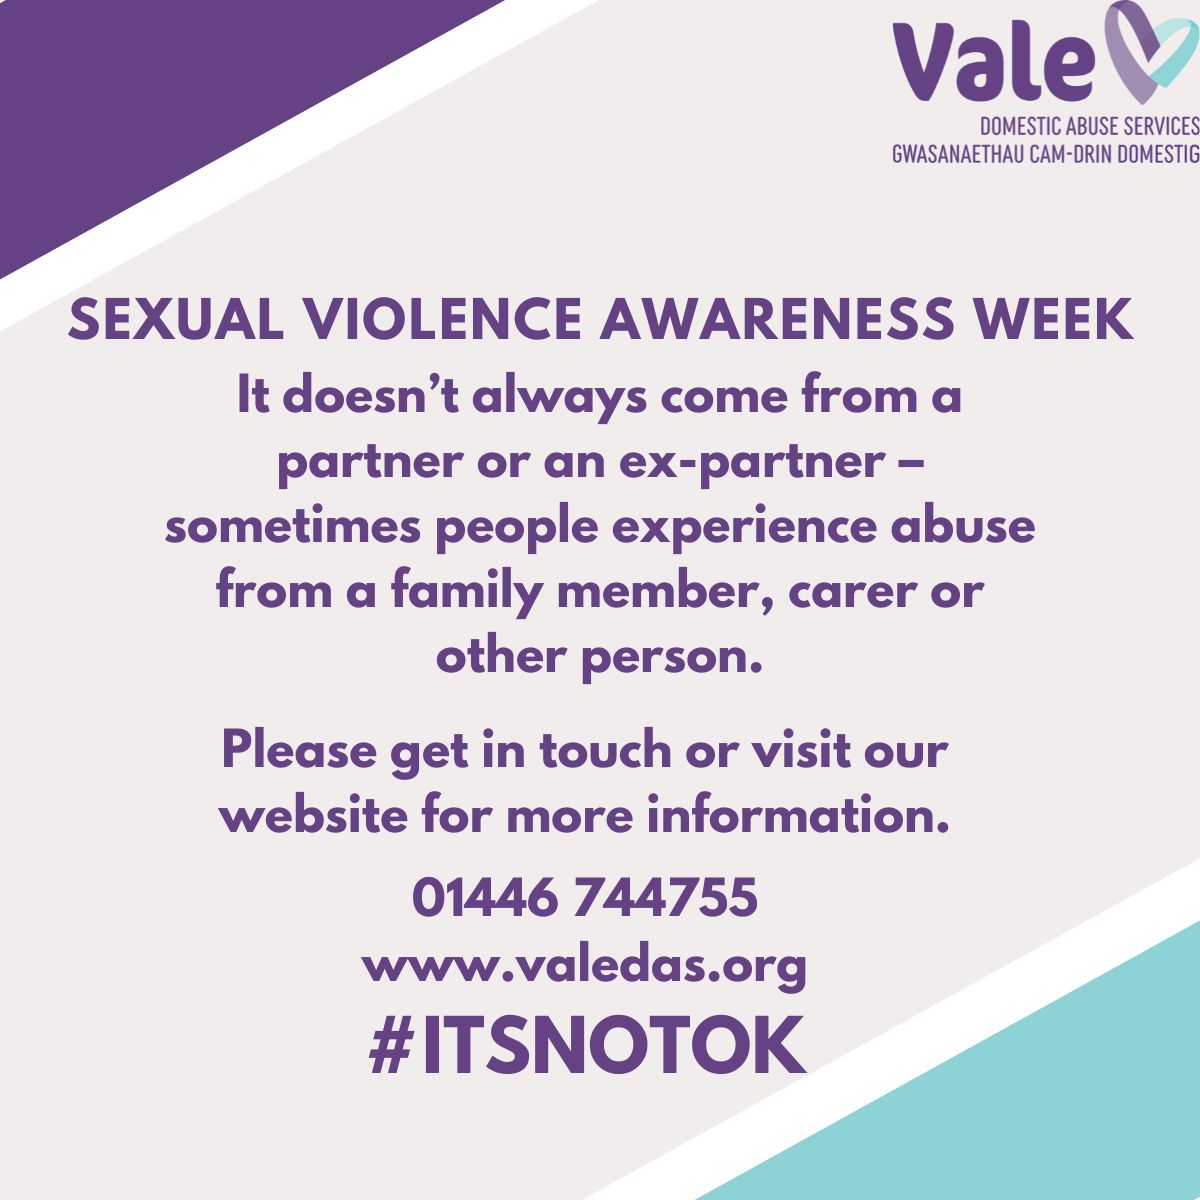 Sexual Abuse doesn’t always come from a partner/ex-partner and can be experienced from a family member, carer, or other person. Our team at Vale DAS are here to help you. Call: 01446 744755 Email: info@valedas.org #ItsNotOk #SexualAbuse #SexualViolenceAwarenessWeek